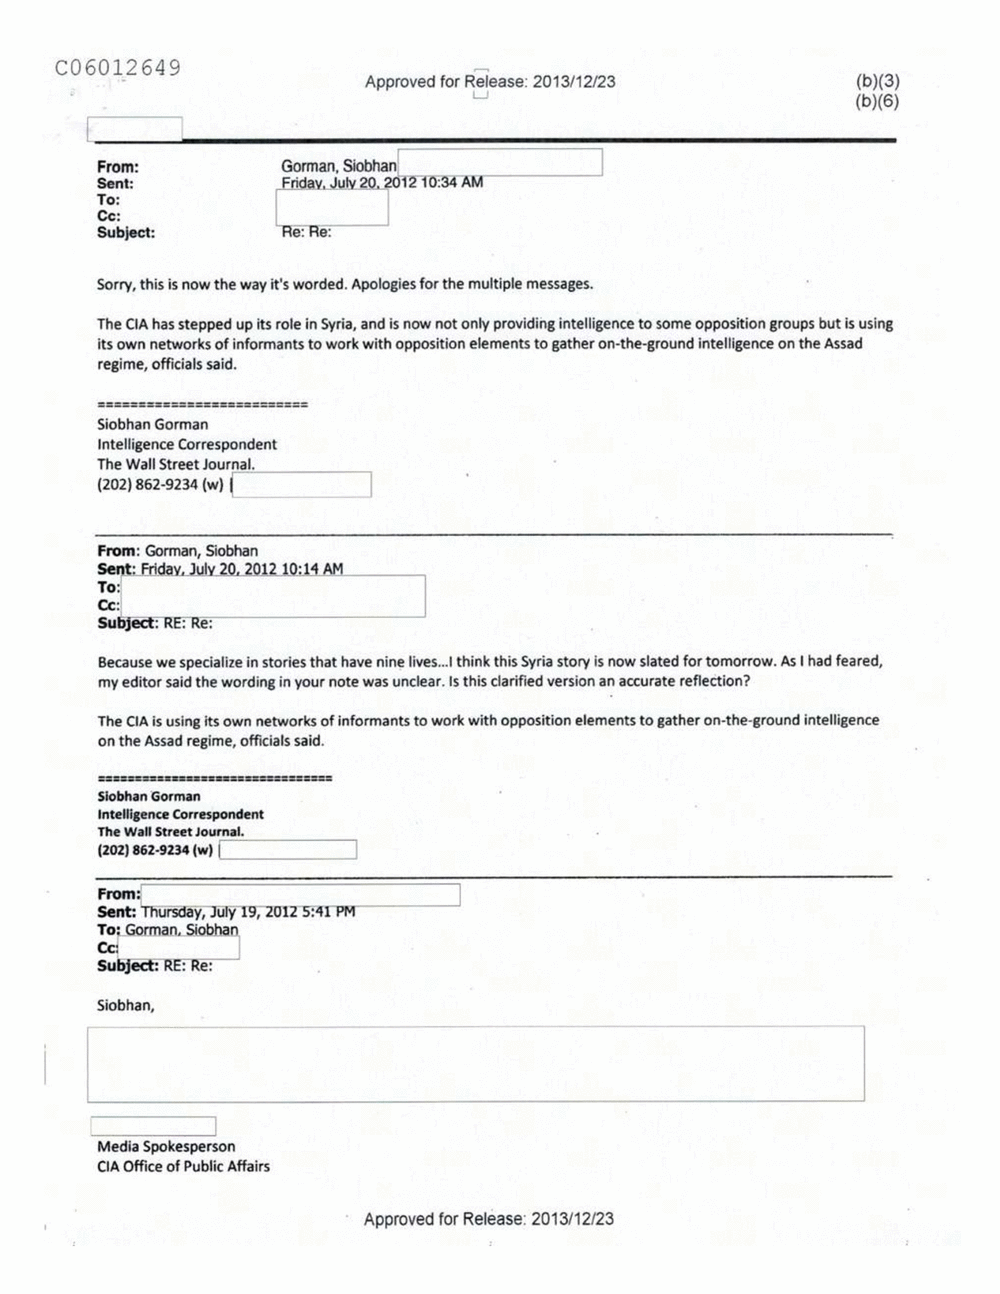 Page 221 from Email Correspondence Between Reporters and CIA Flacks